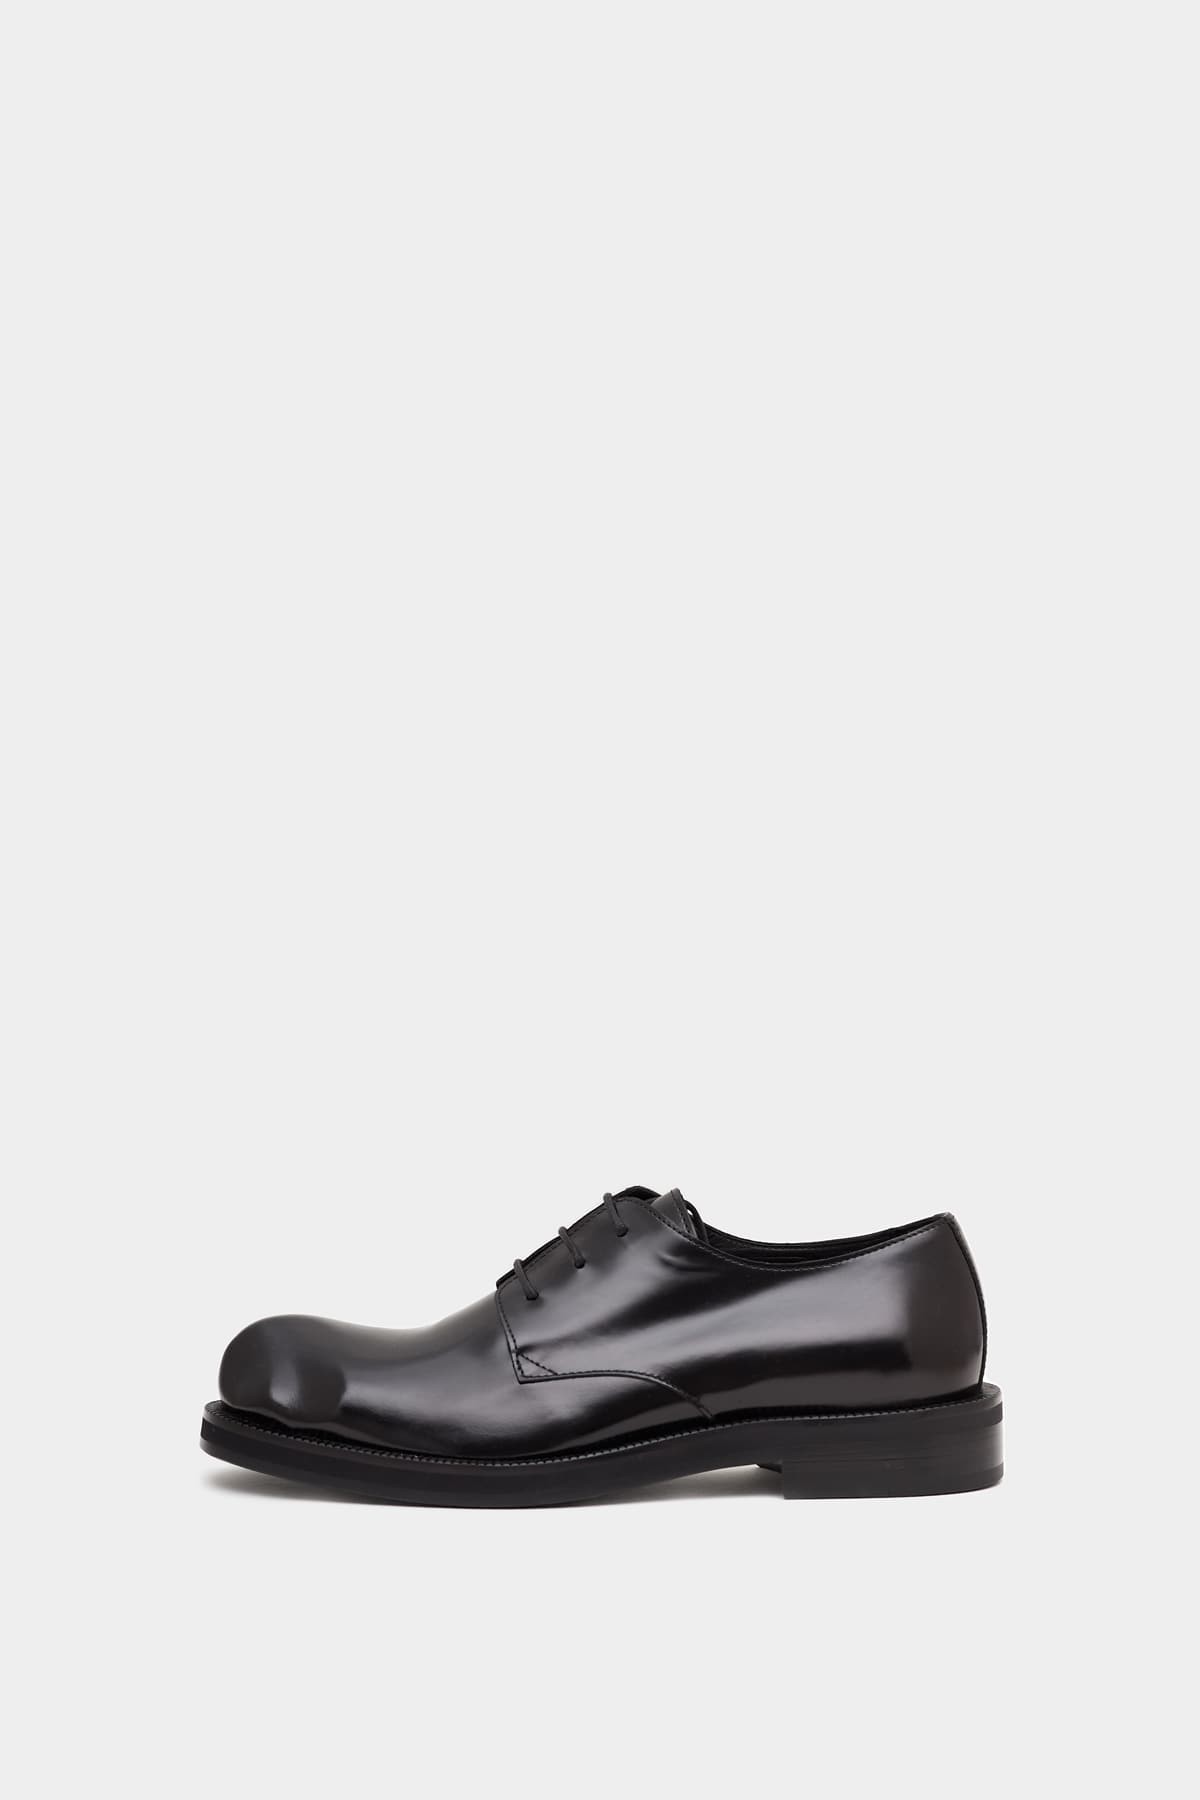 ACNE STUDIOS BLACK LEATHER DERBY SHOES IAMNUE